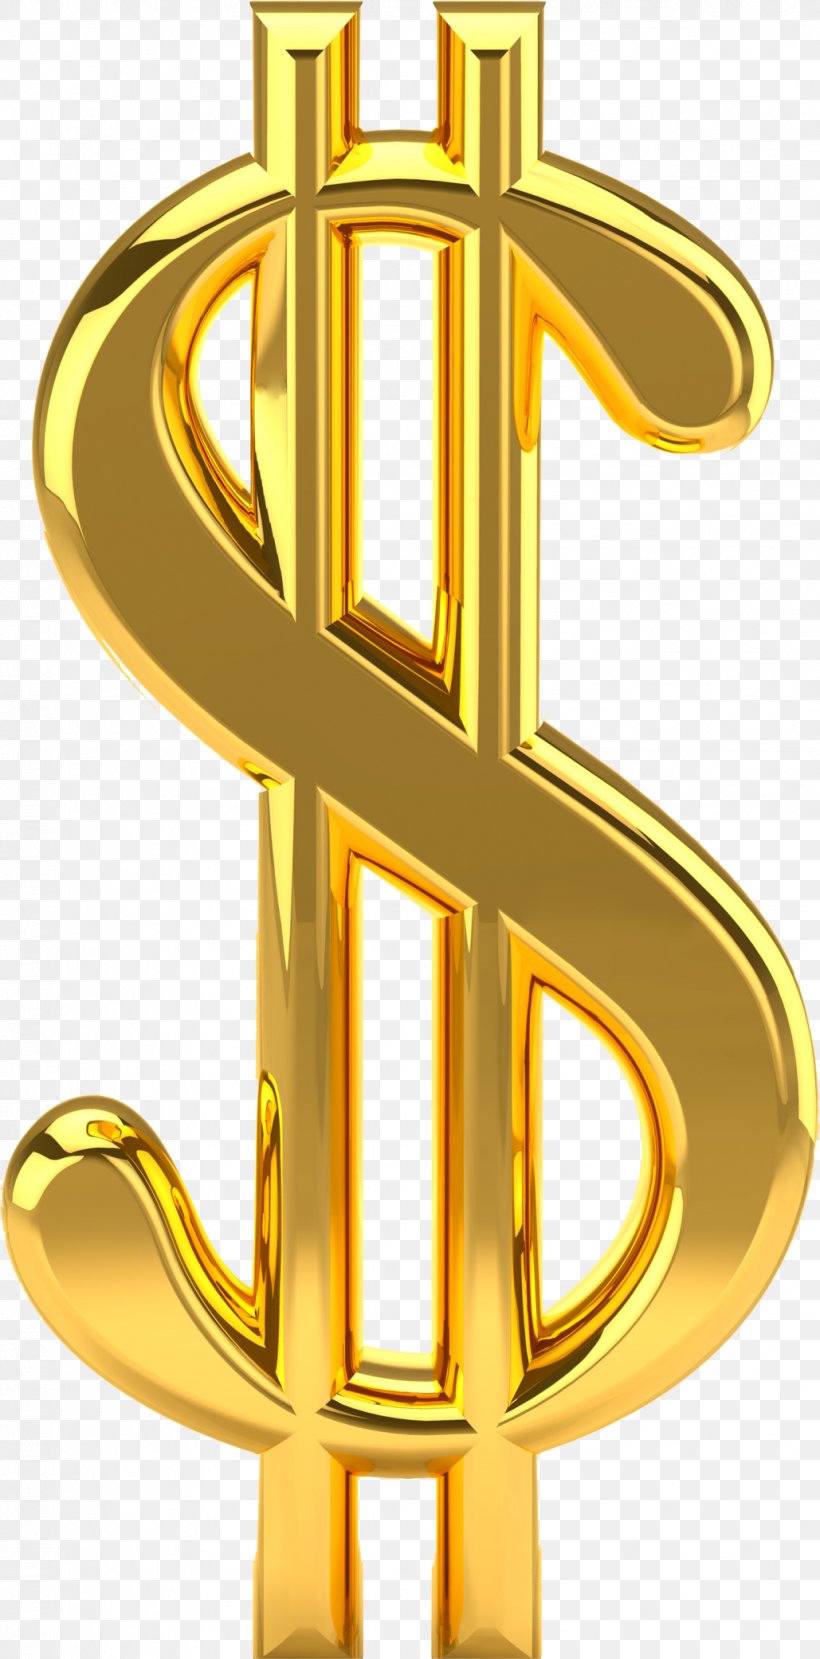 Dollar Sign Dollar Coin United States Dollar Clip Art, PNG, 1029x2083px, Dollar Sign, Banknote, Cross, Dollar, Dollar Coin Download Free